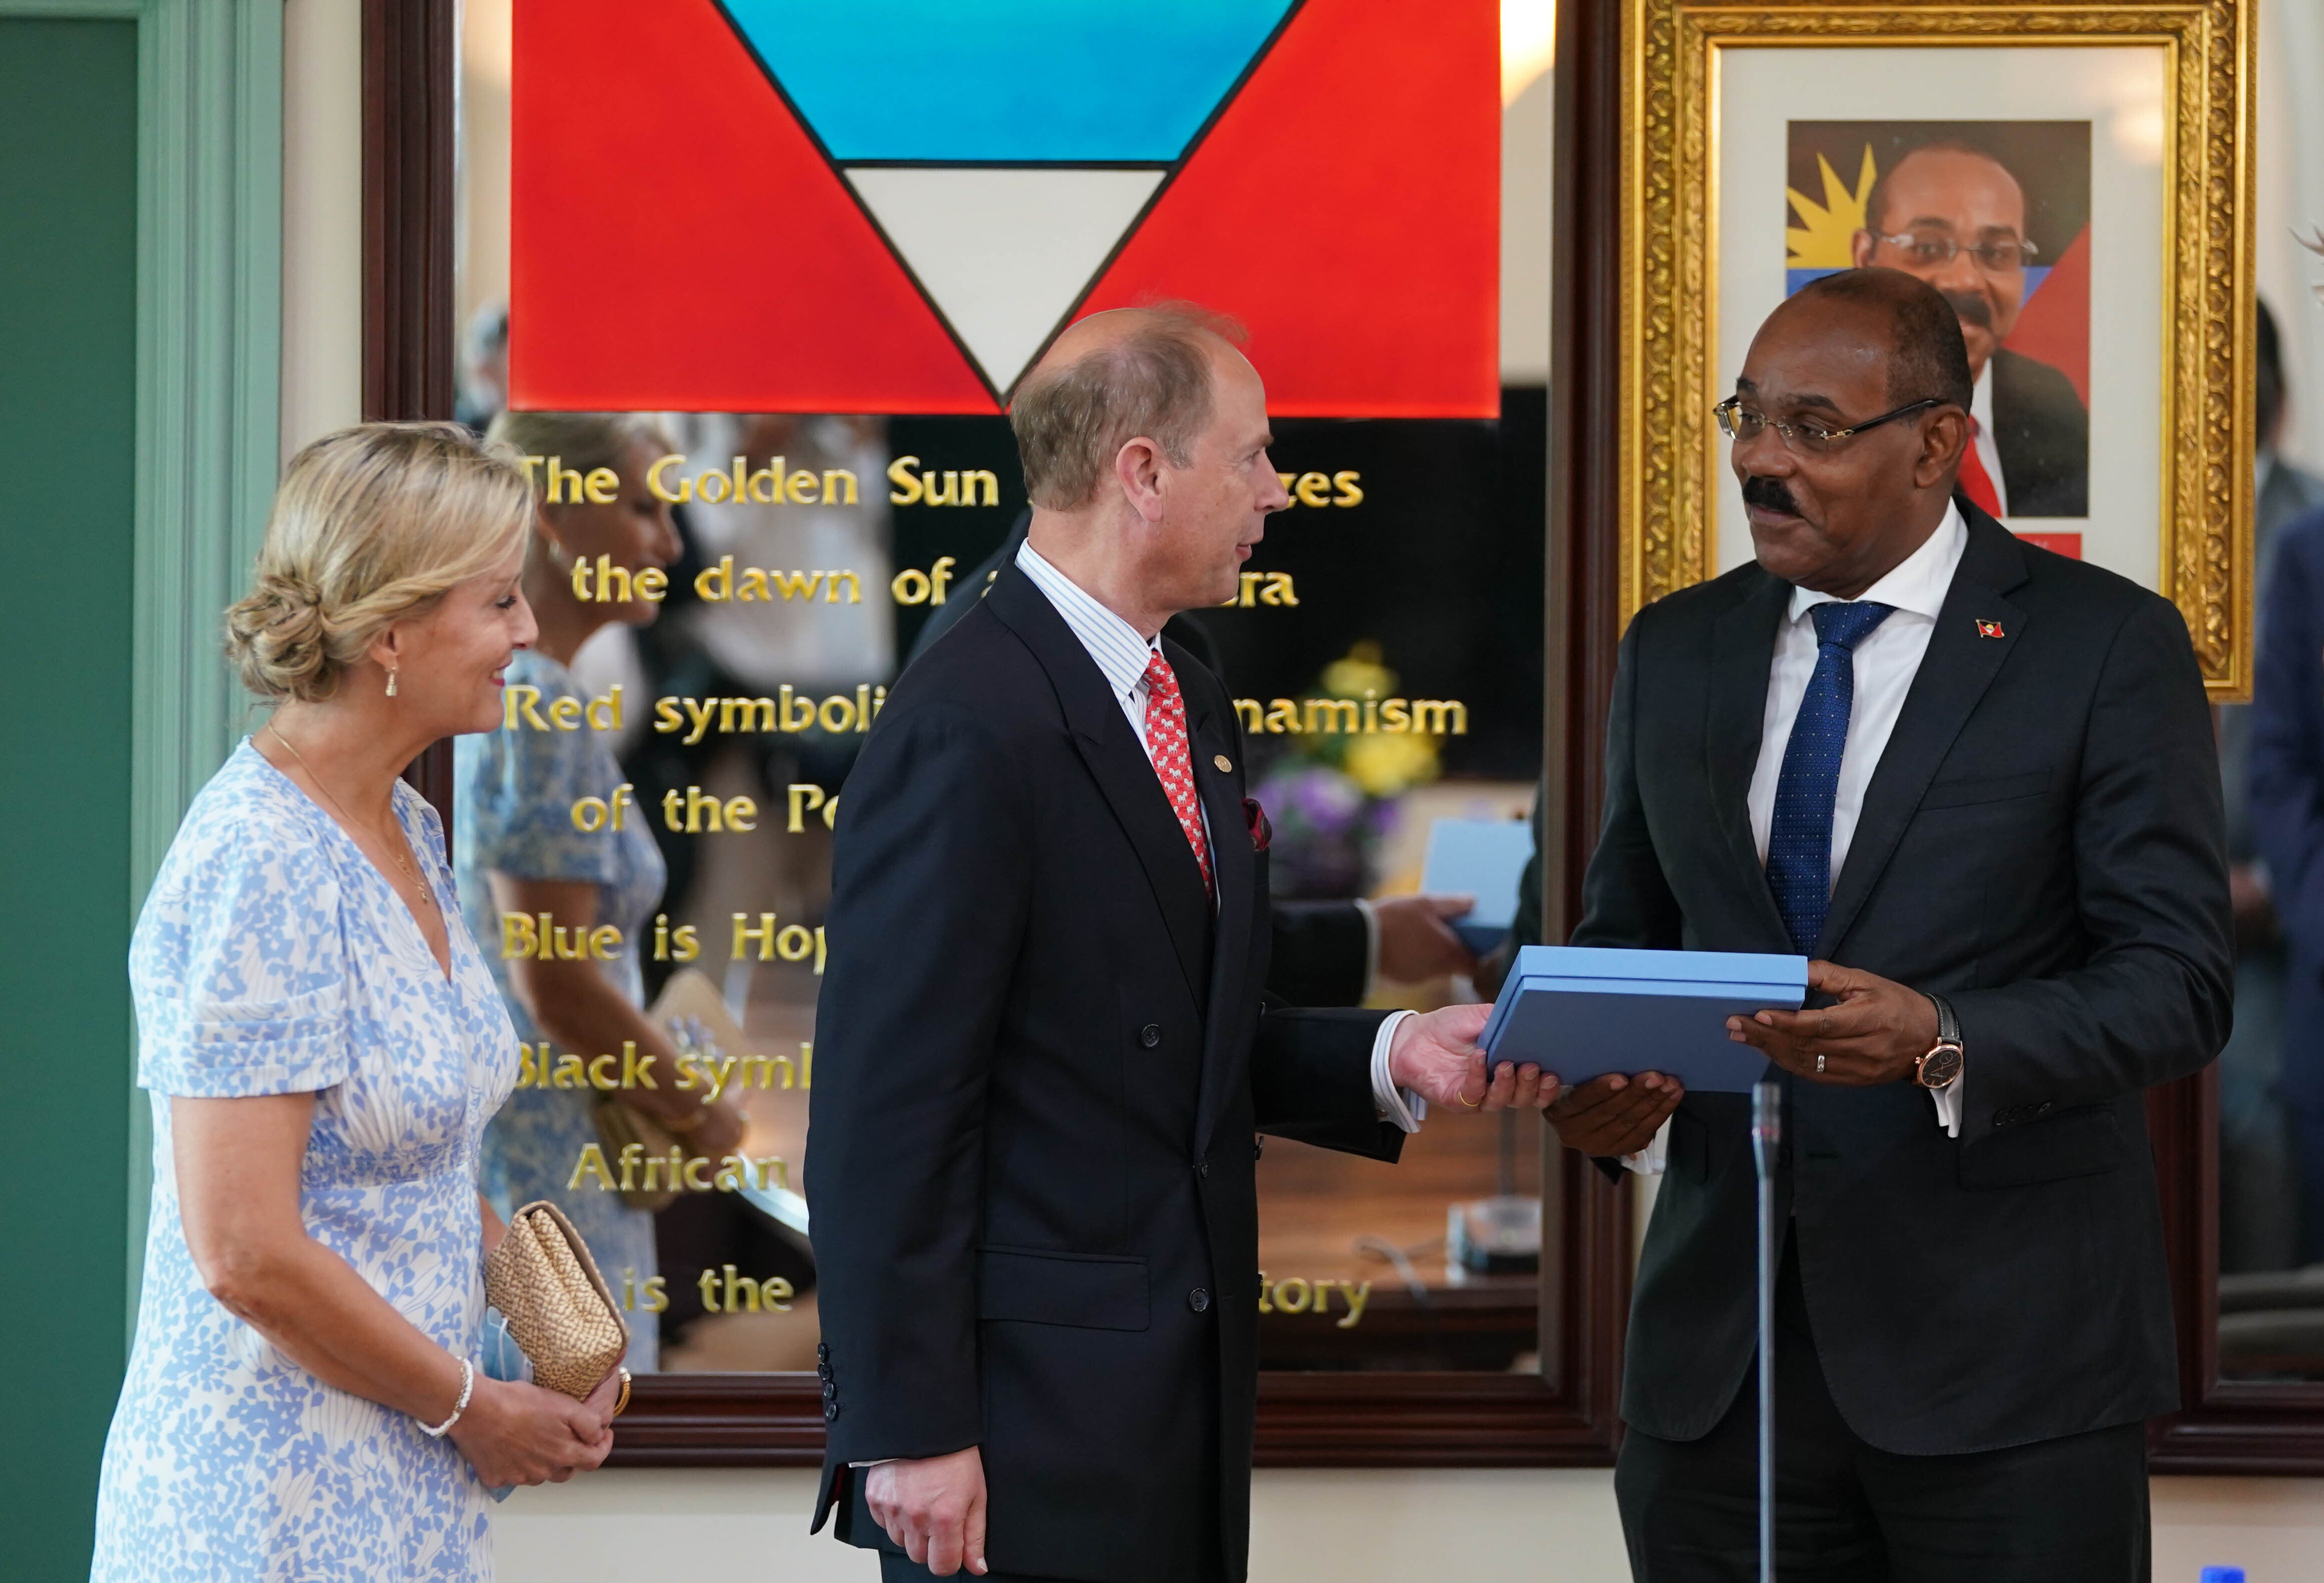 The Earl and the Countess of Wessex are presented with a gift by Gaston Browne, Prime Minister of Antigua and Barbuda, at Government House, St. John’s, Antigua and Barbuda (Joe Giddens/PA)